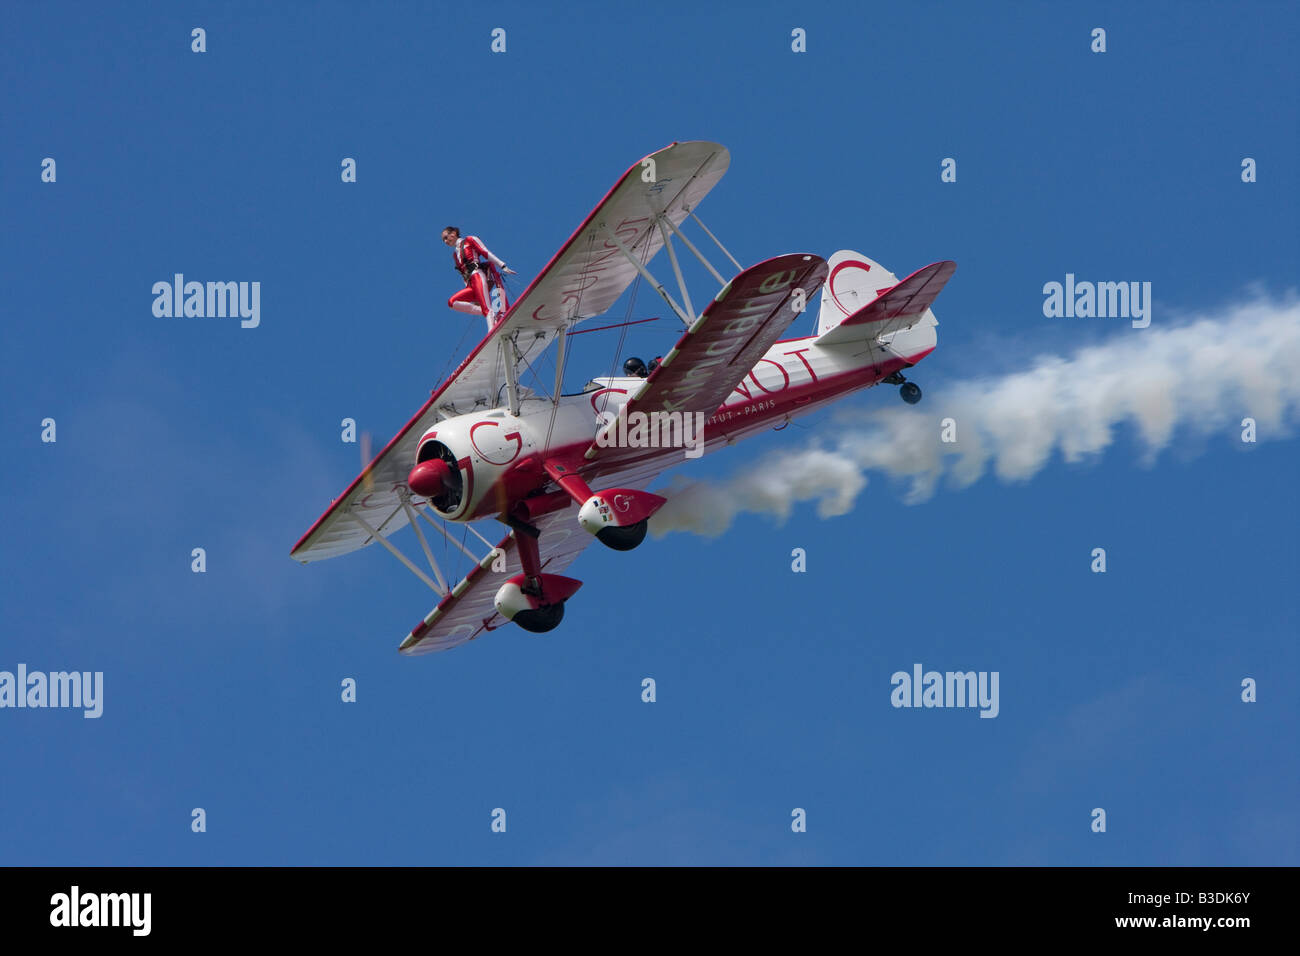 Boeing Stearman PT 17 Kaydet of the Team Guinot wing walking display team at Sywell Stock Photo